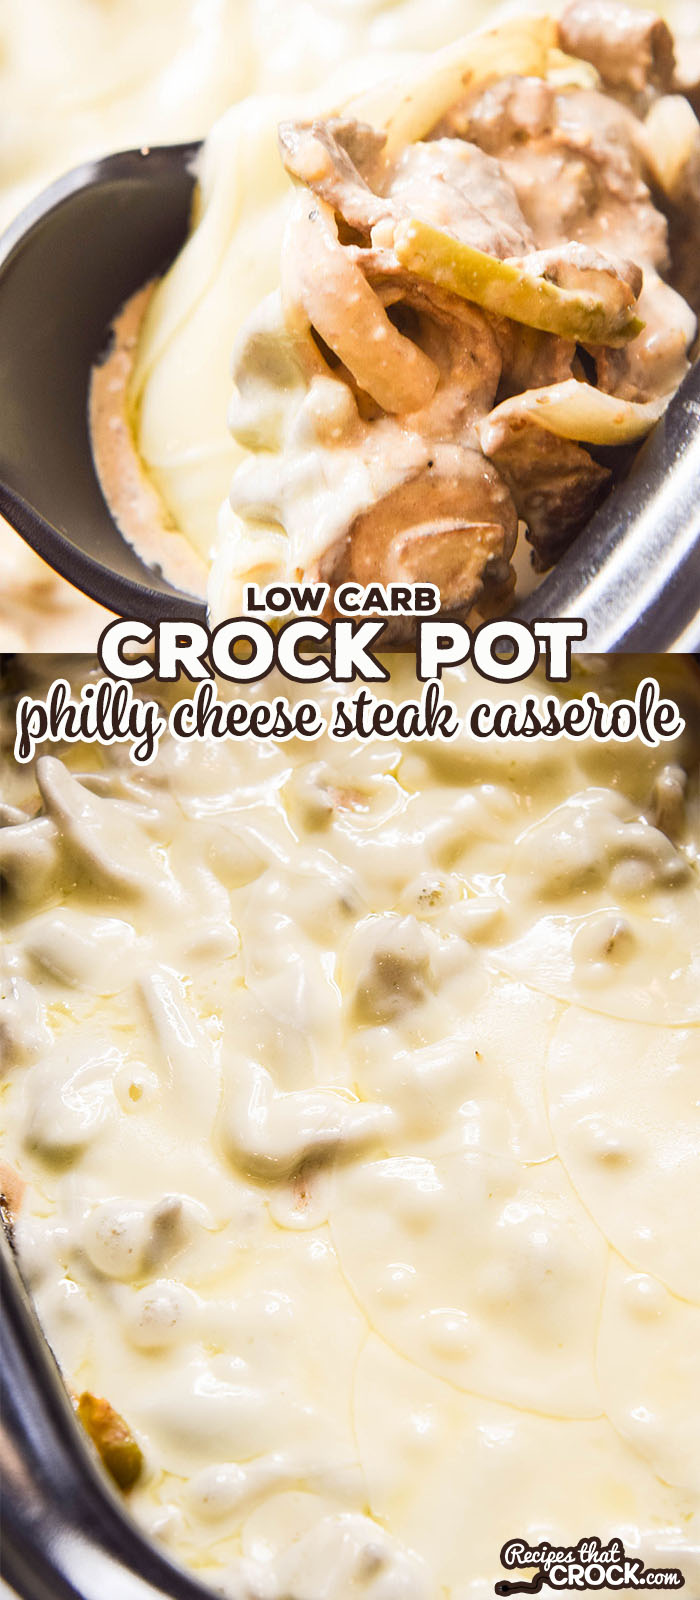 Are you looking for a delicious low carb recipe to satisfy your Philly Cheese Steak cravings? This Crock Pot Philly Cheese Steak Casserole is a creamy, cheesy family dinner casserole recipe inspired by the famous sandwich that is low on carbs and high on flavor!